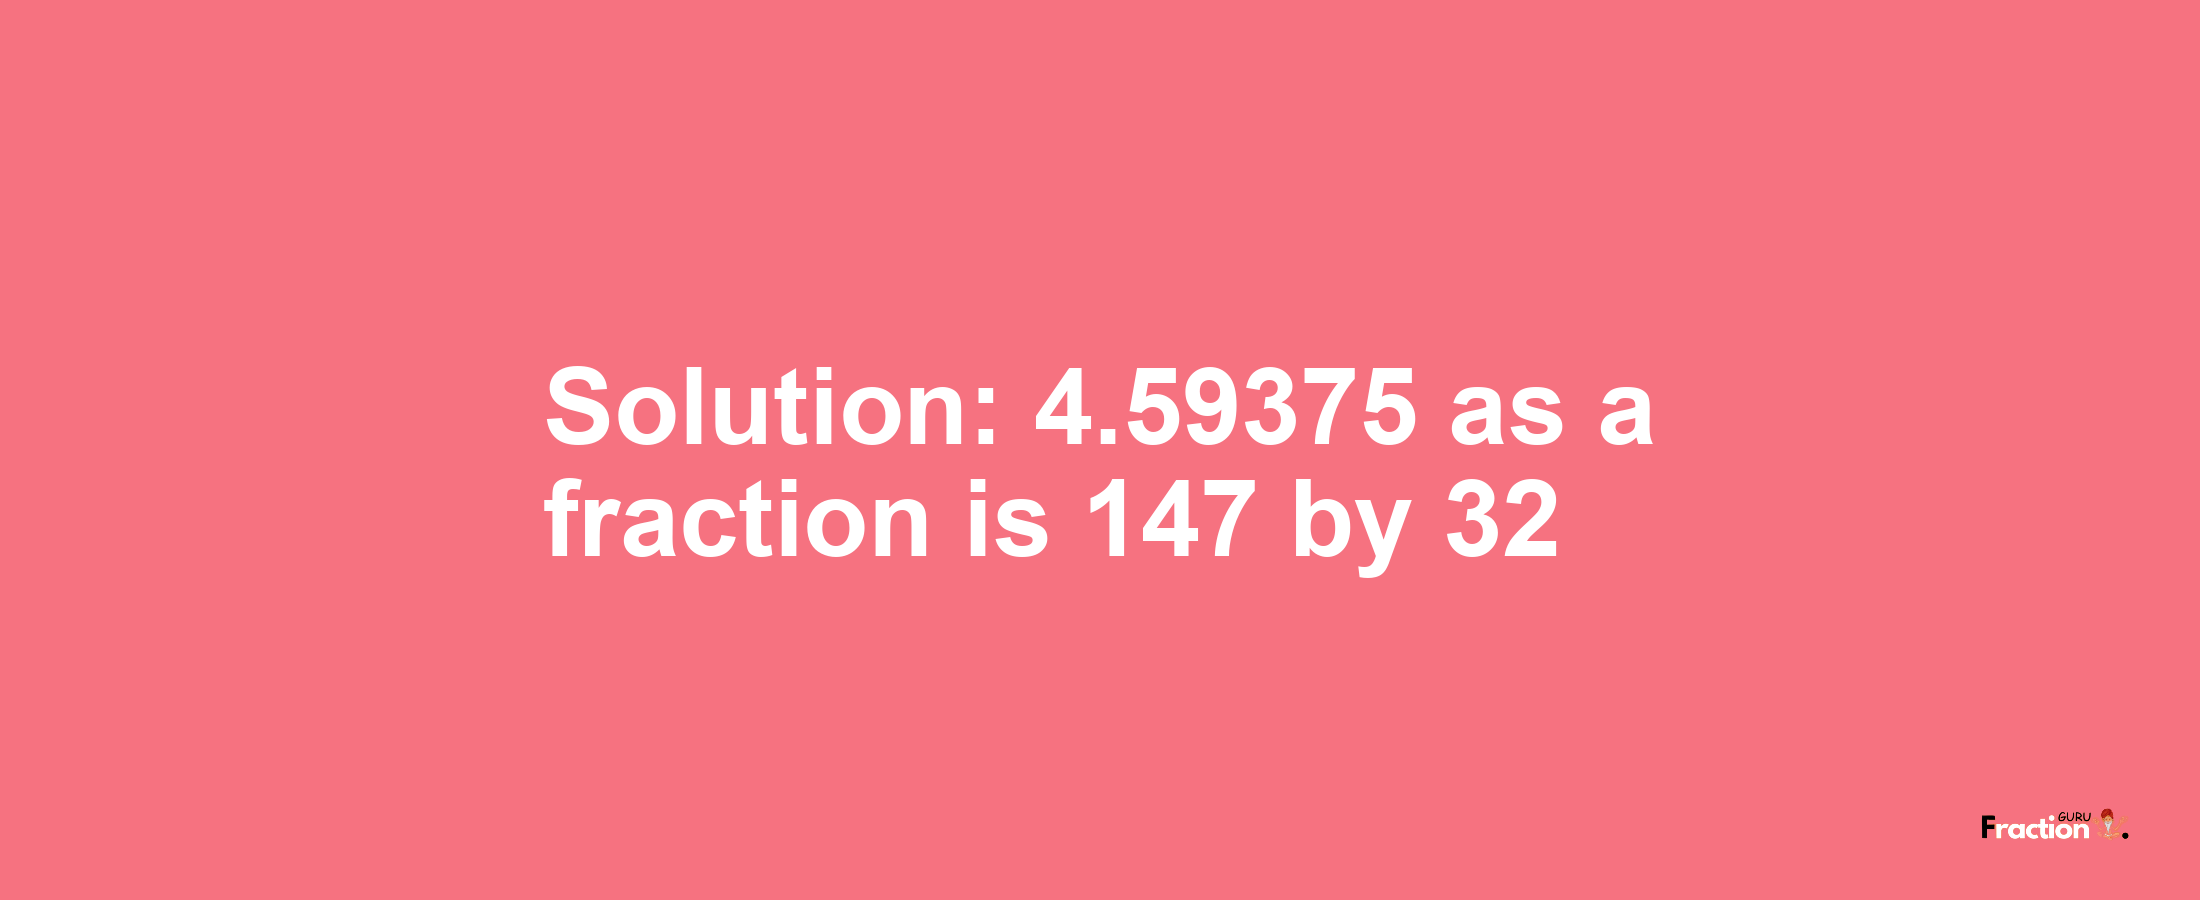 Solution:4.59375 as a fraction is 147/32